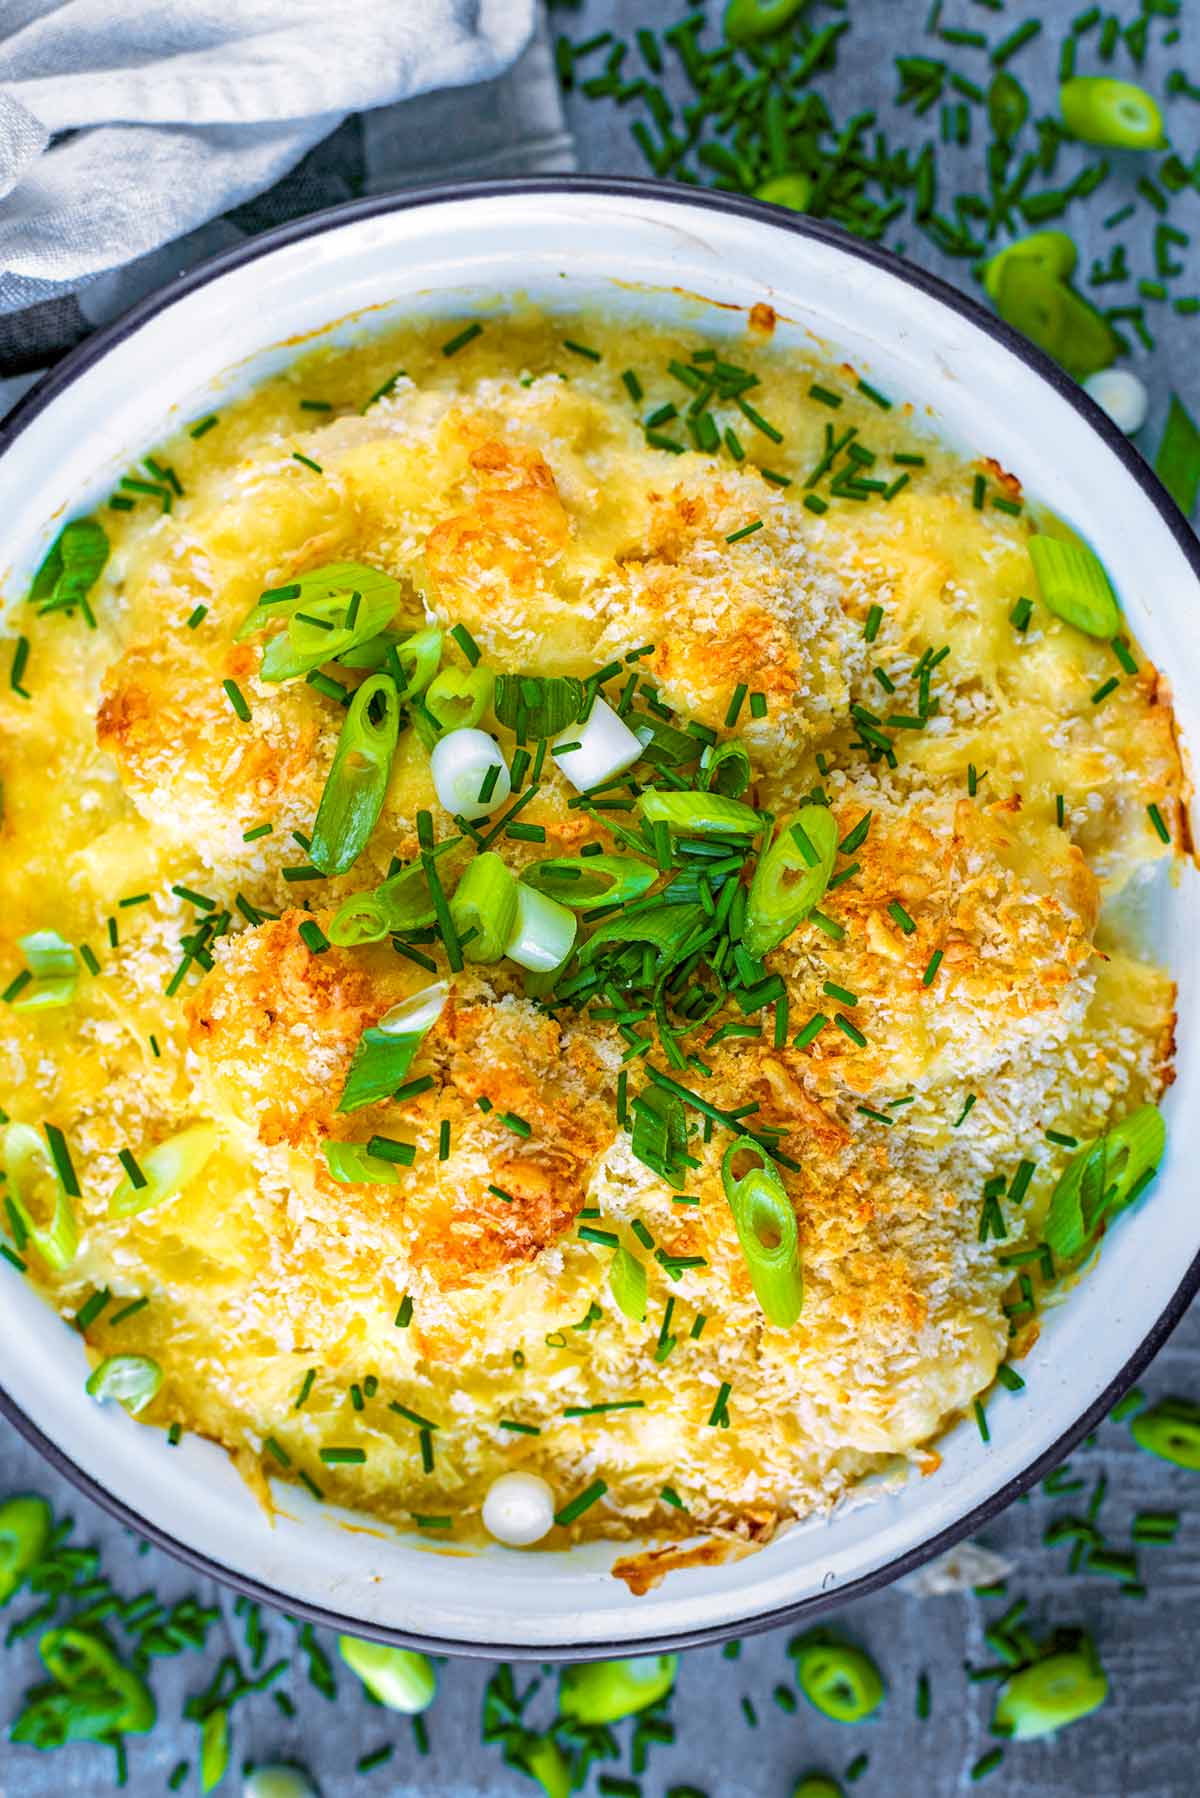 Baked cauliflower cheese topped with green onions and herbs.